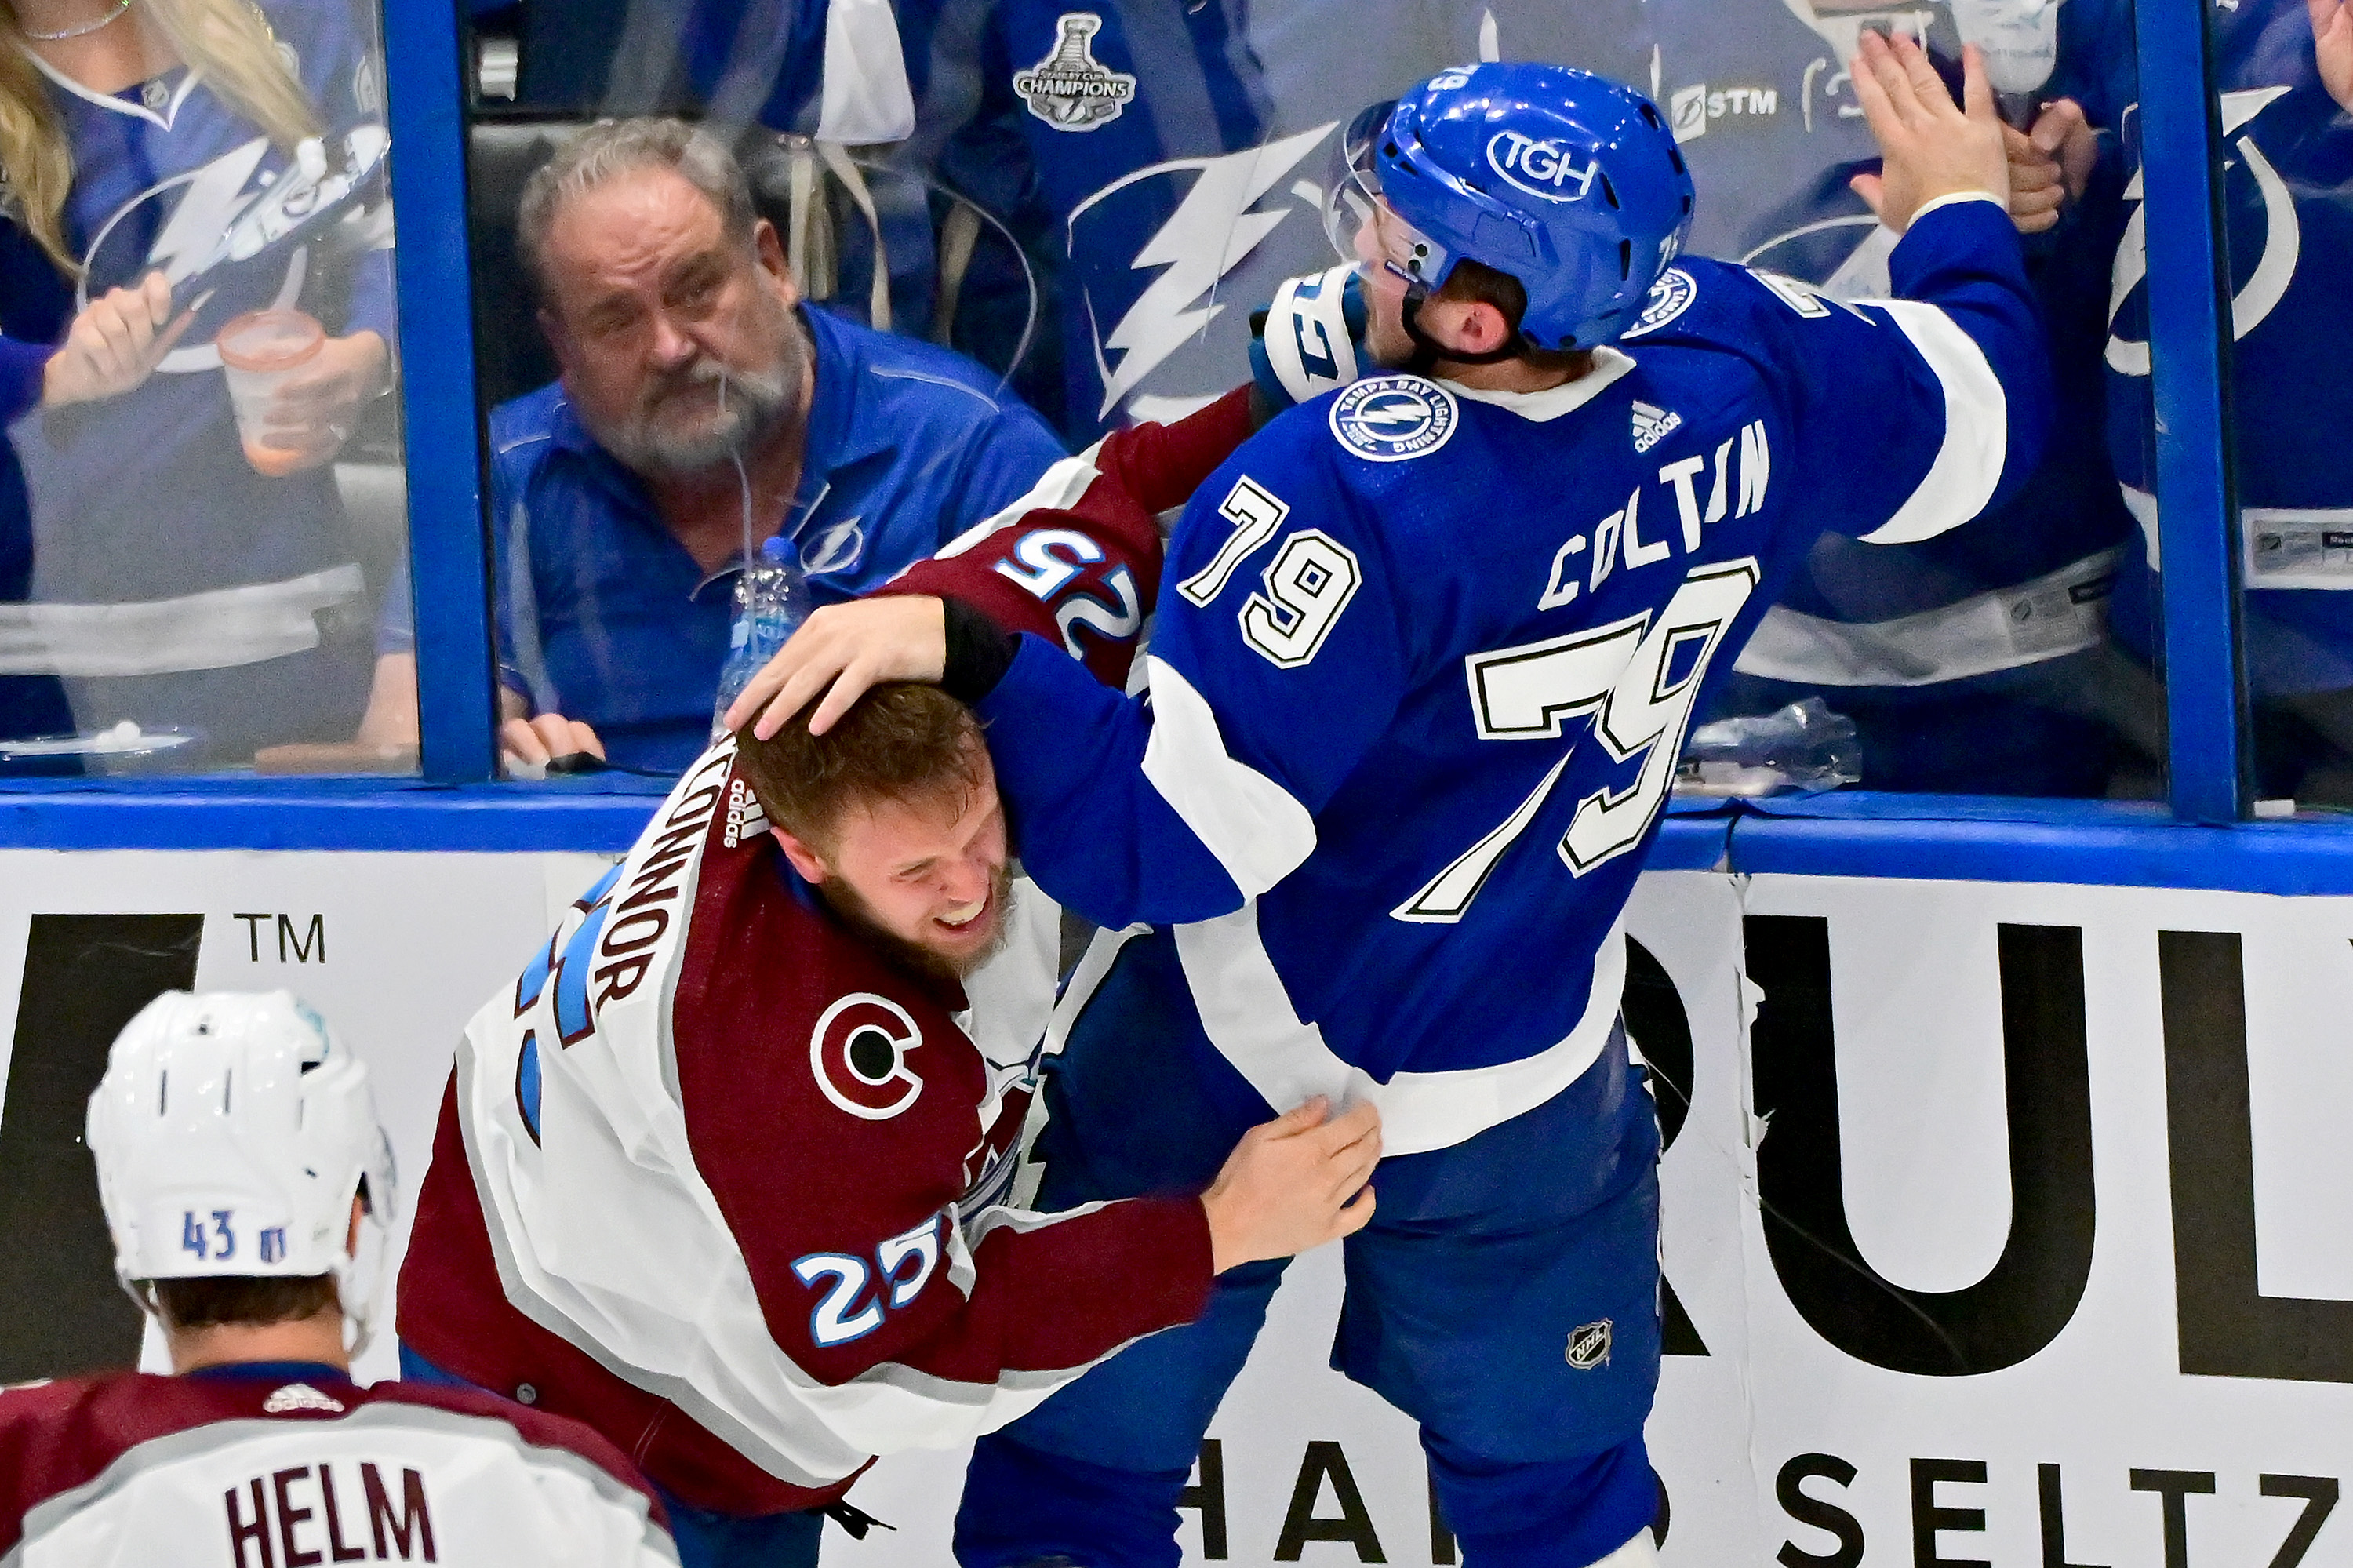 Lightning move within 1 win of Cup as power play catches fire